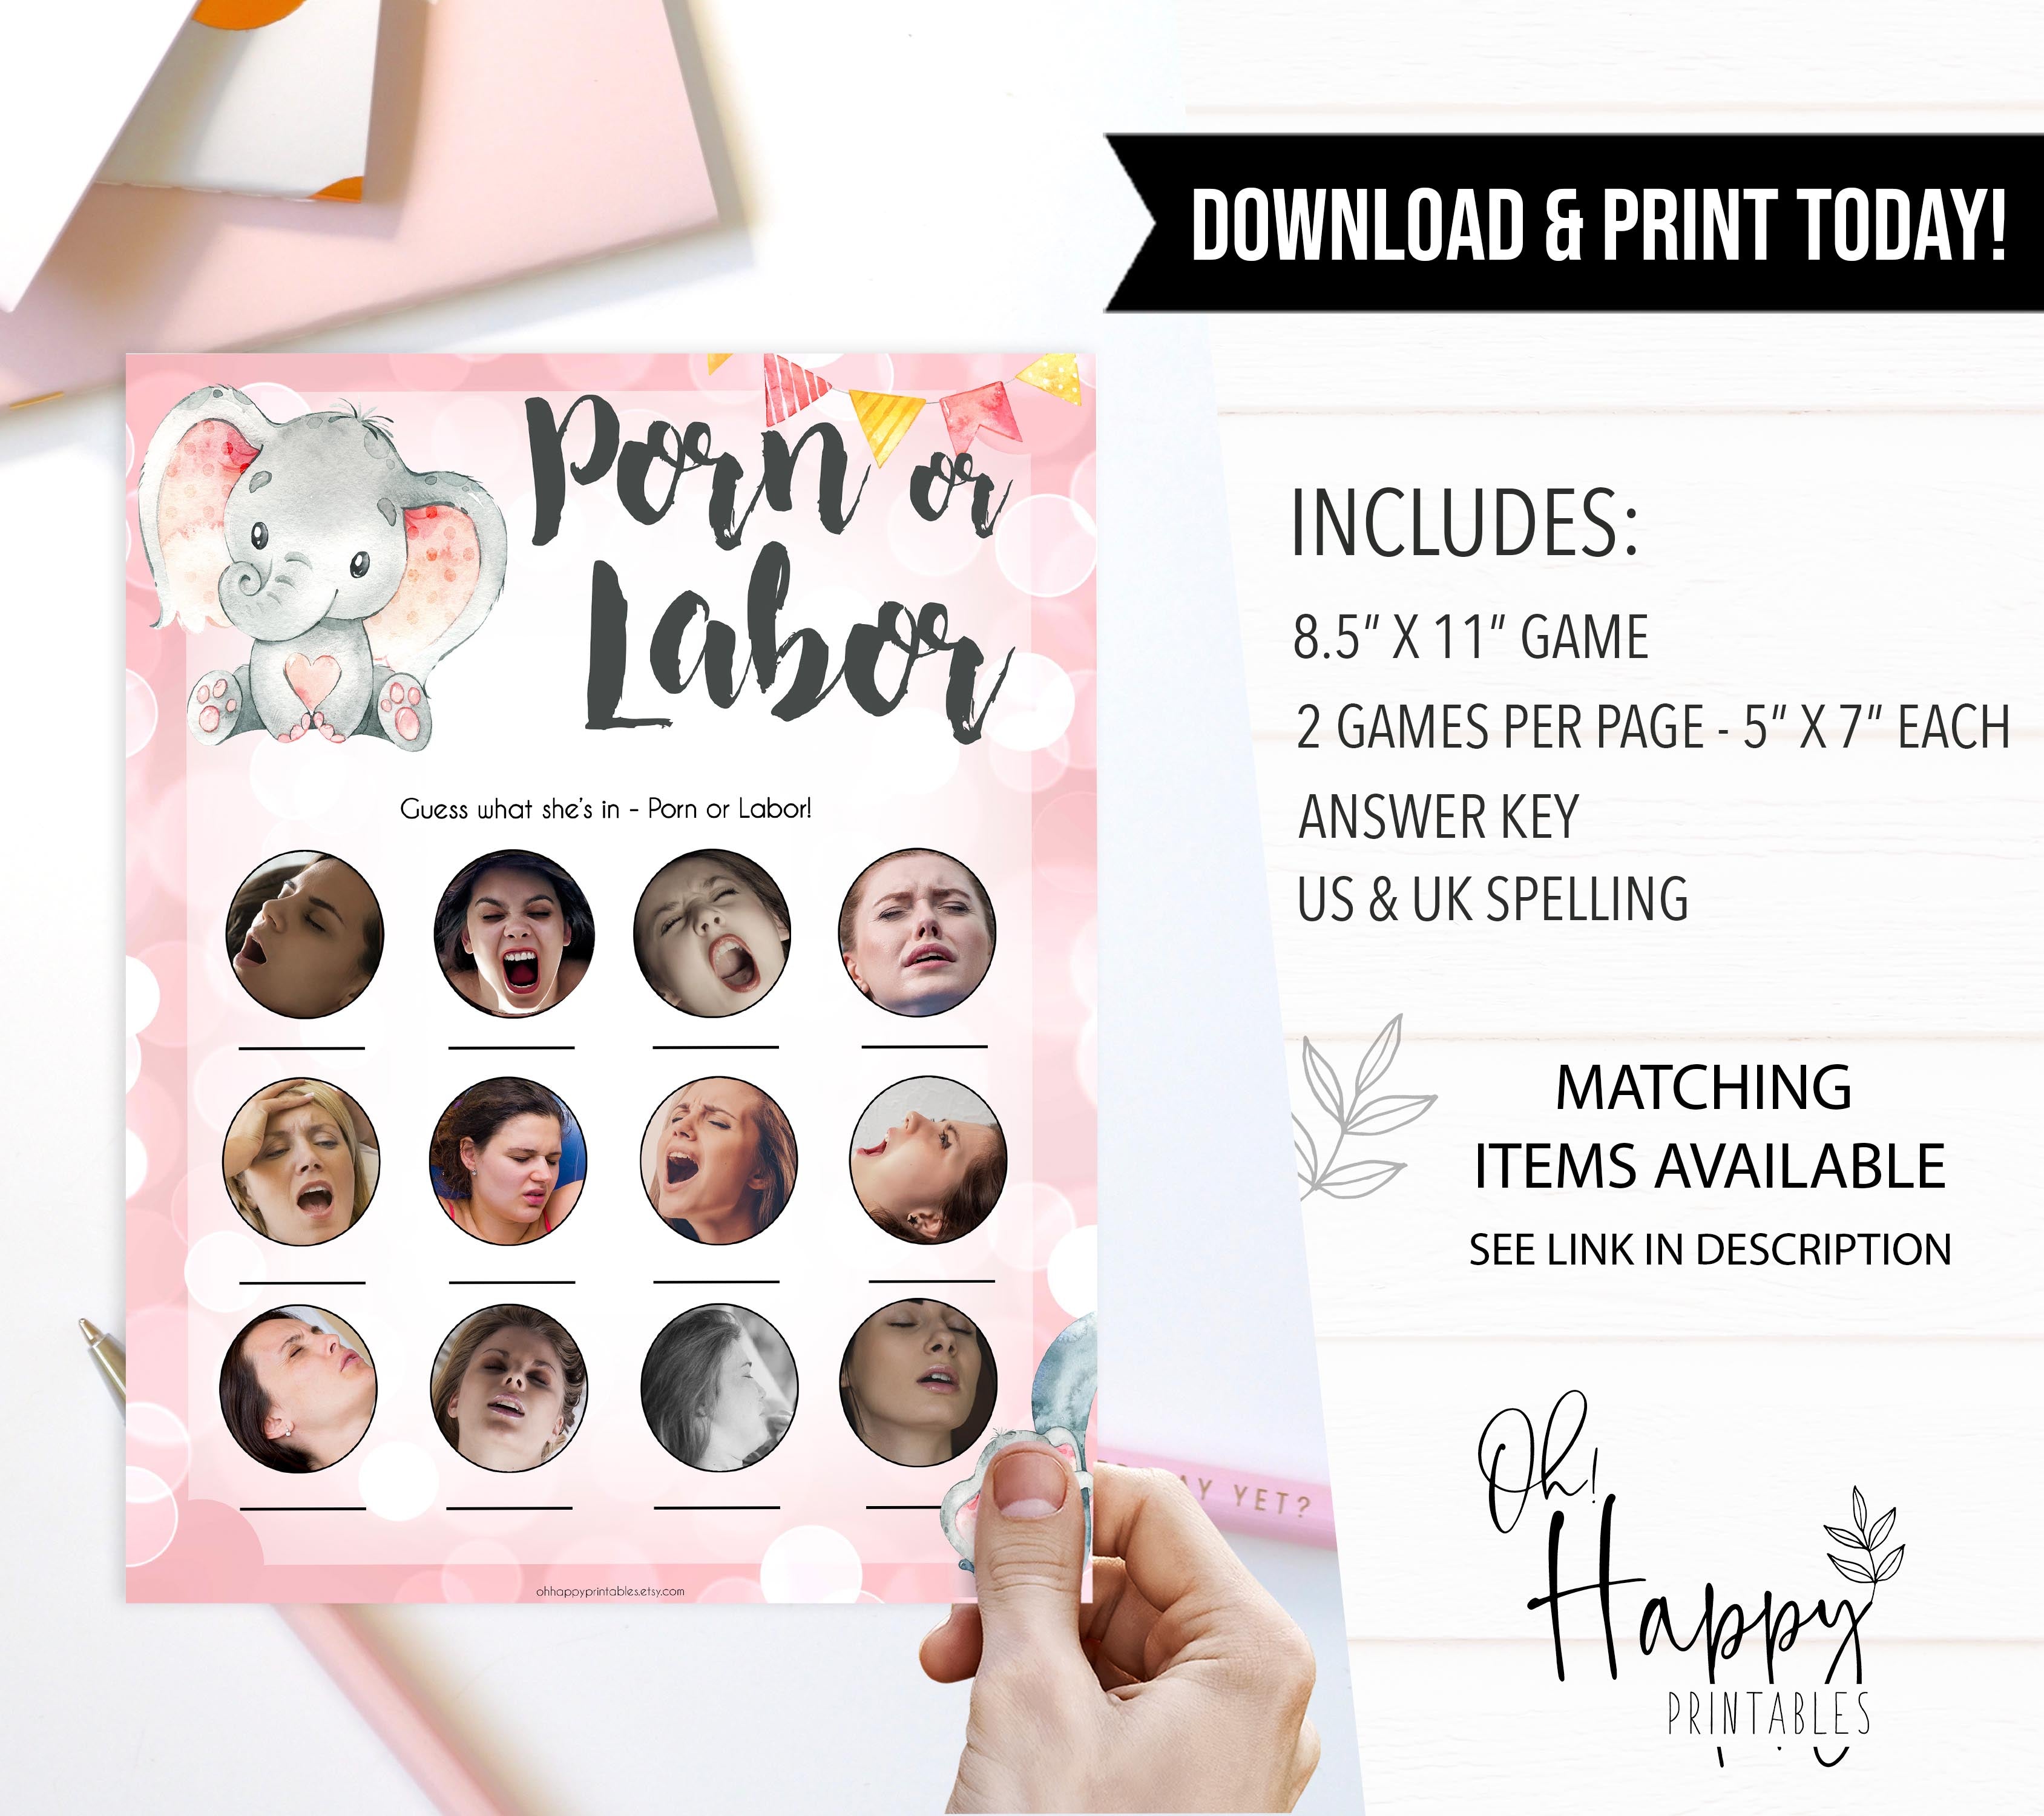 labor or porn, baby bump or beer belly, boobs or butts, Printable baby shower games, fun abby games, baby shower games, fun baby shower ideas, top baby shower ideas, pink elephant baby shower, pink baby shower ideas